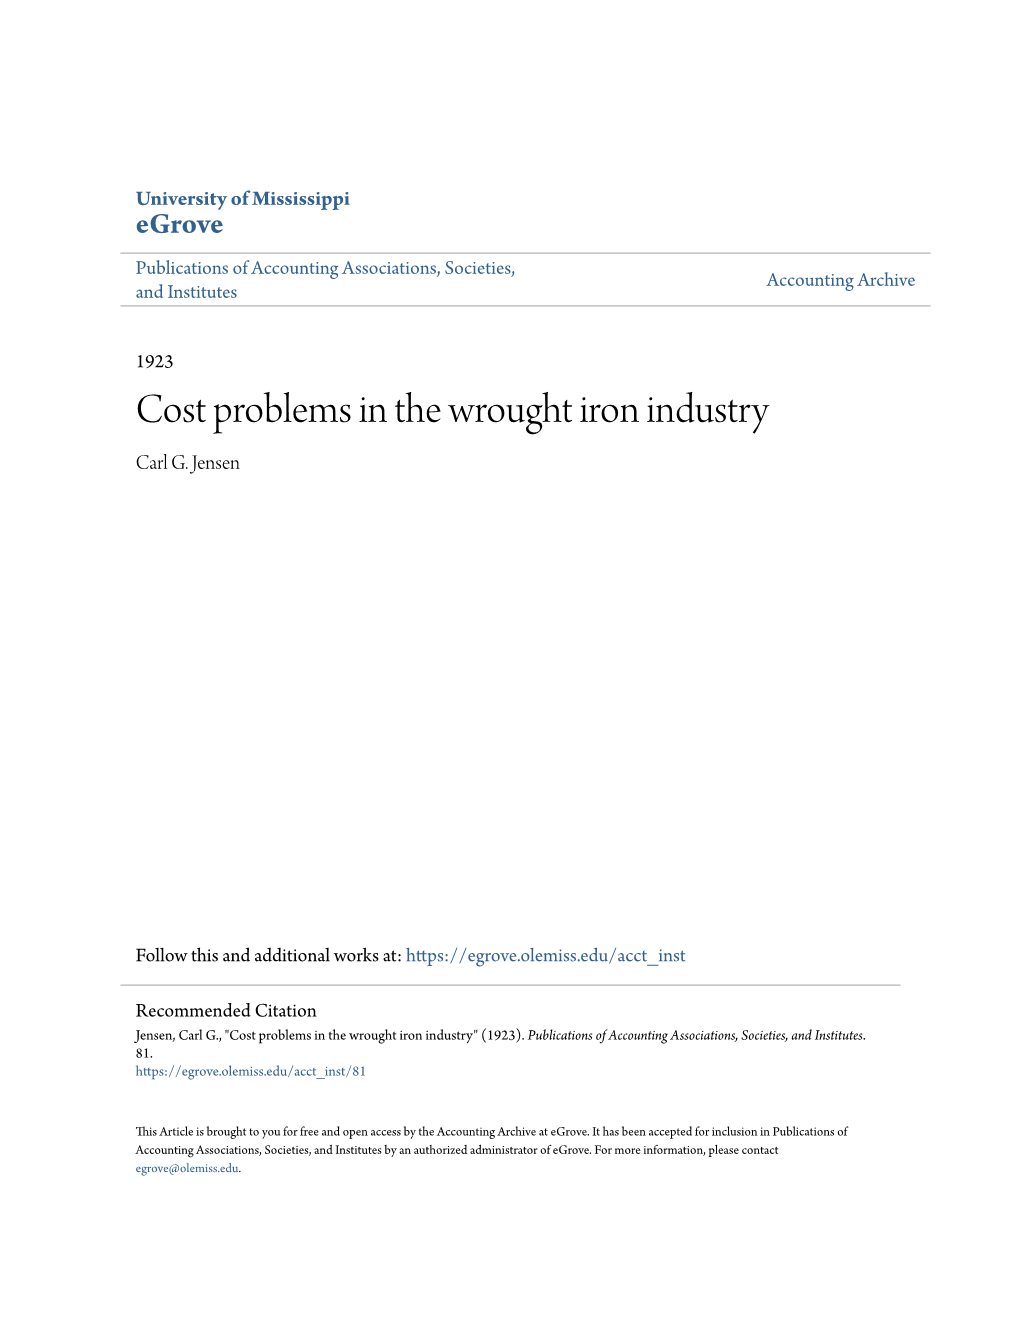 Cost Problems in the Wrought Iron Industry Carl G